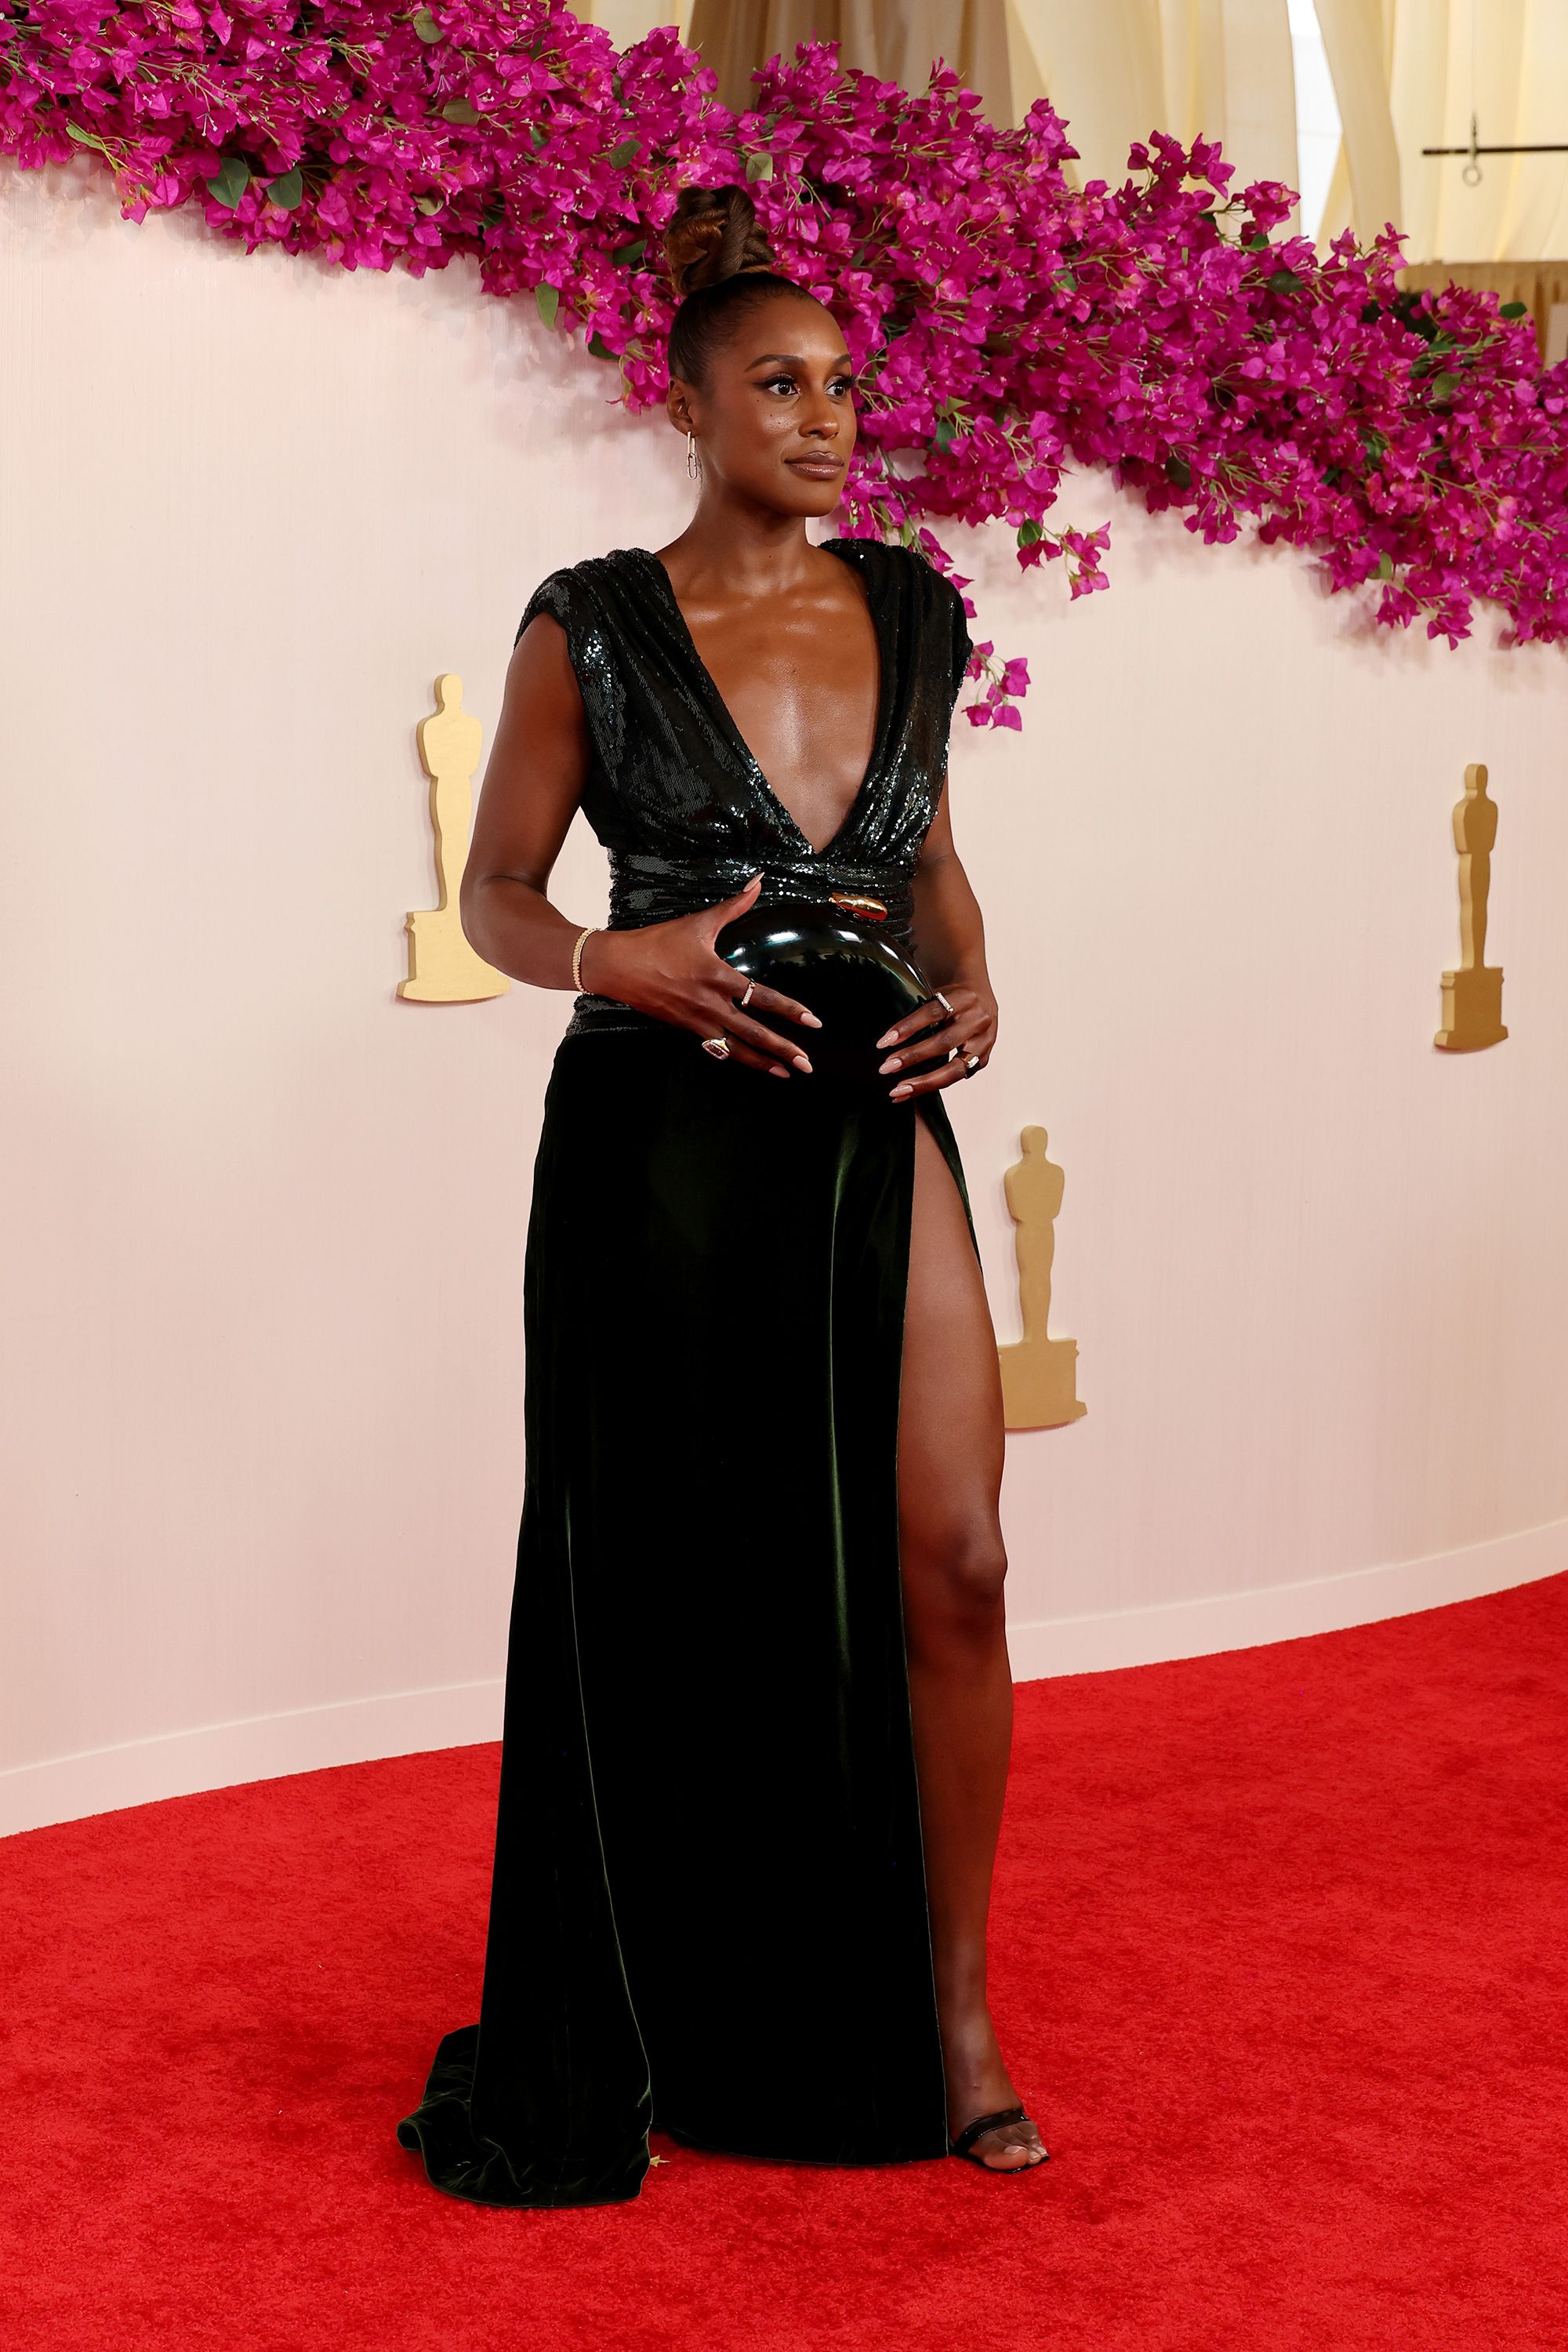 Issa Rae, who has appeared in two nominated films (